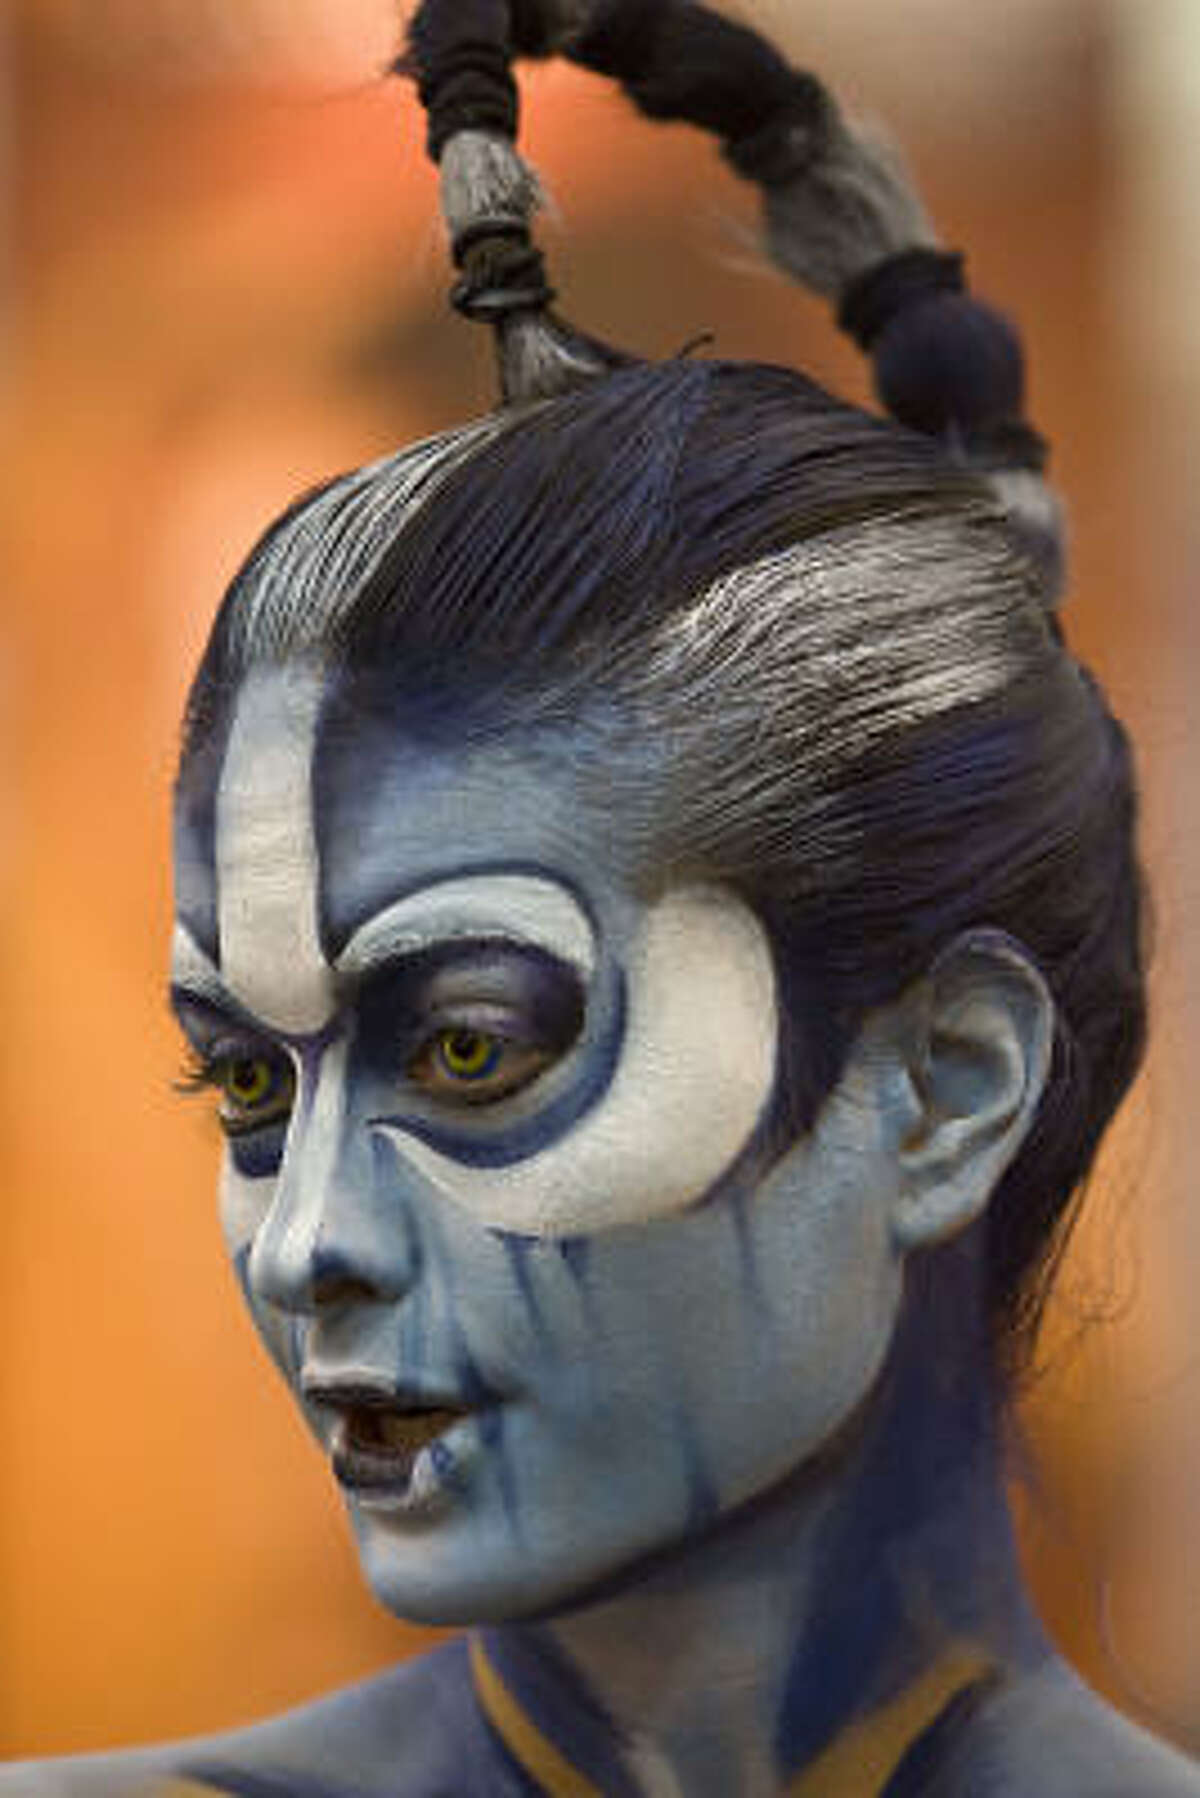 Sindy Perez is painted to resemble a character from the movie Avatar during the Halloween & Party Expo at George R. Brown Convention Center, in Houston.